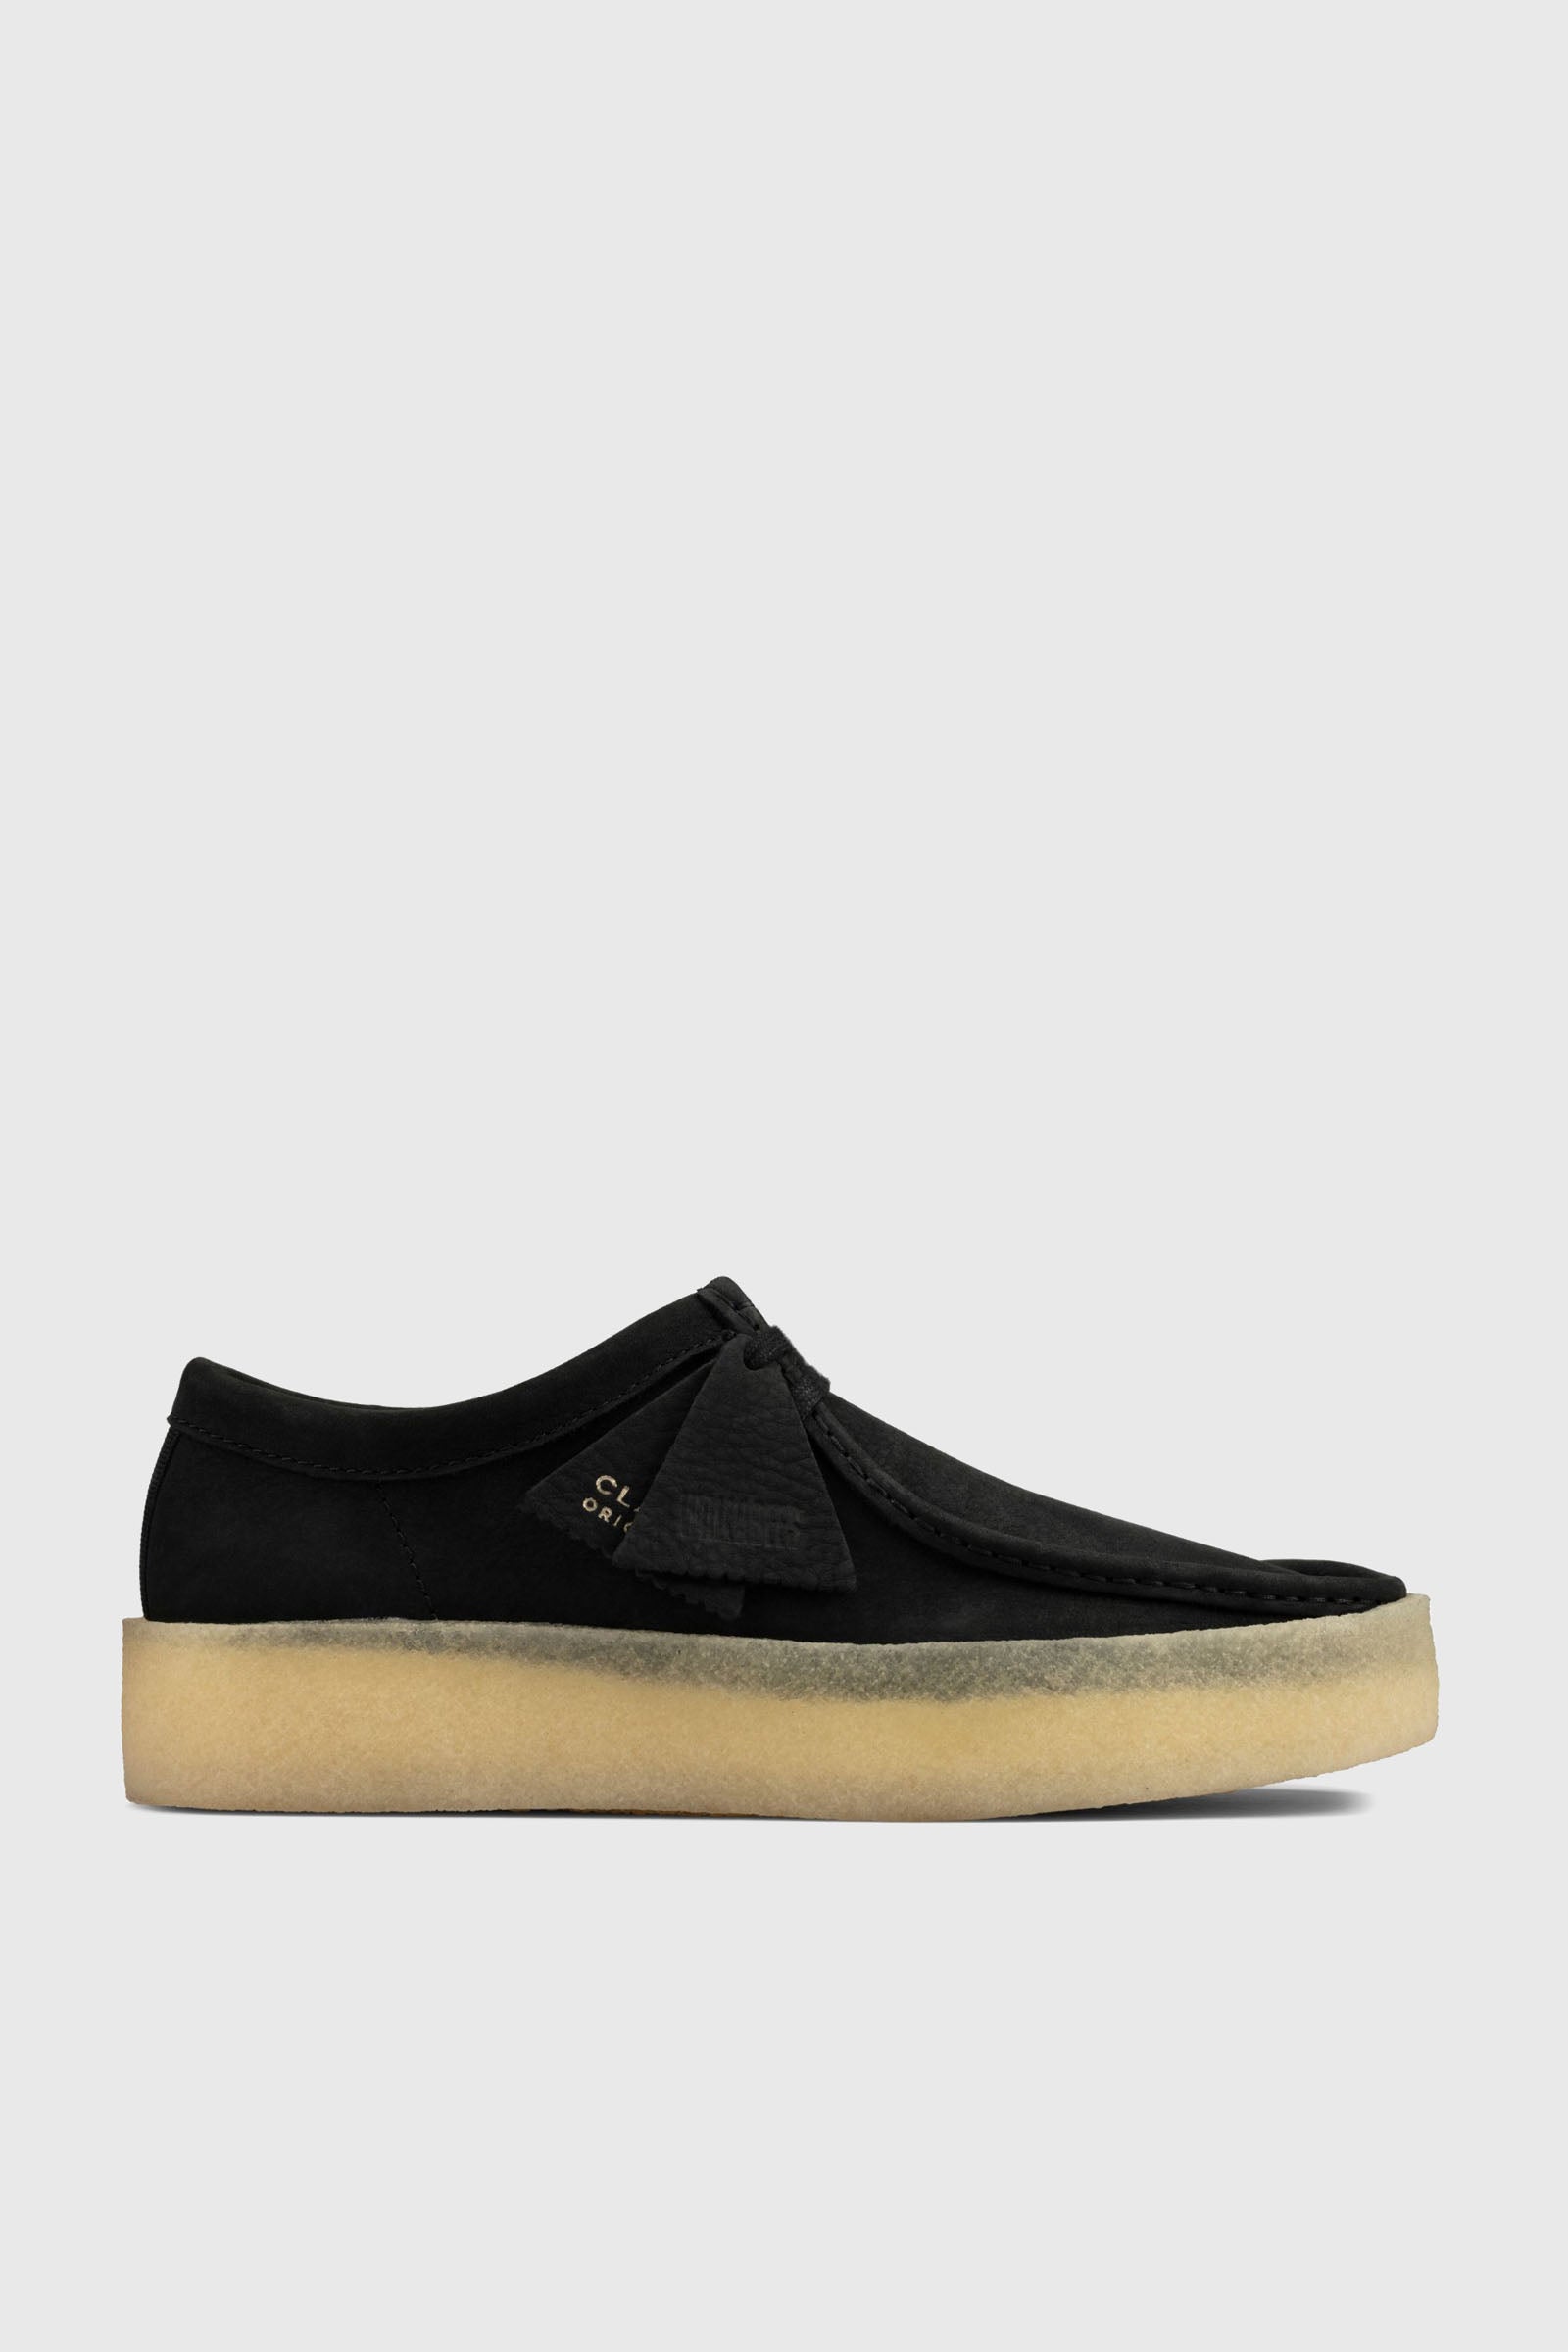 "Clarks Wallabee Cup Black Leather Shoe for Men" - 1